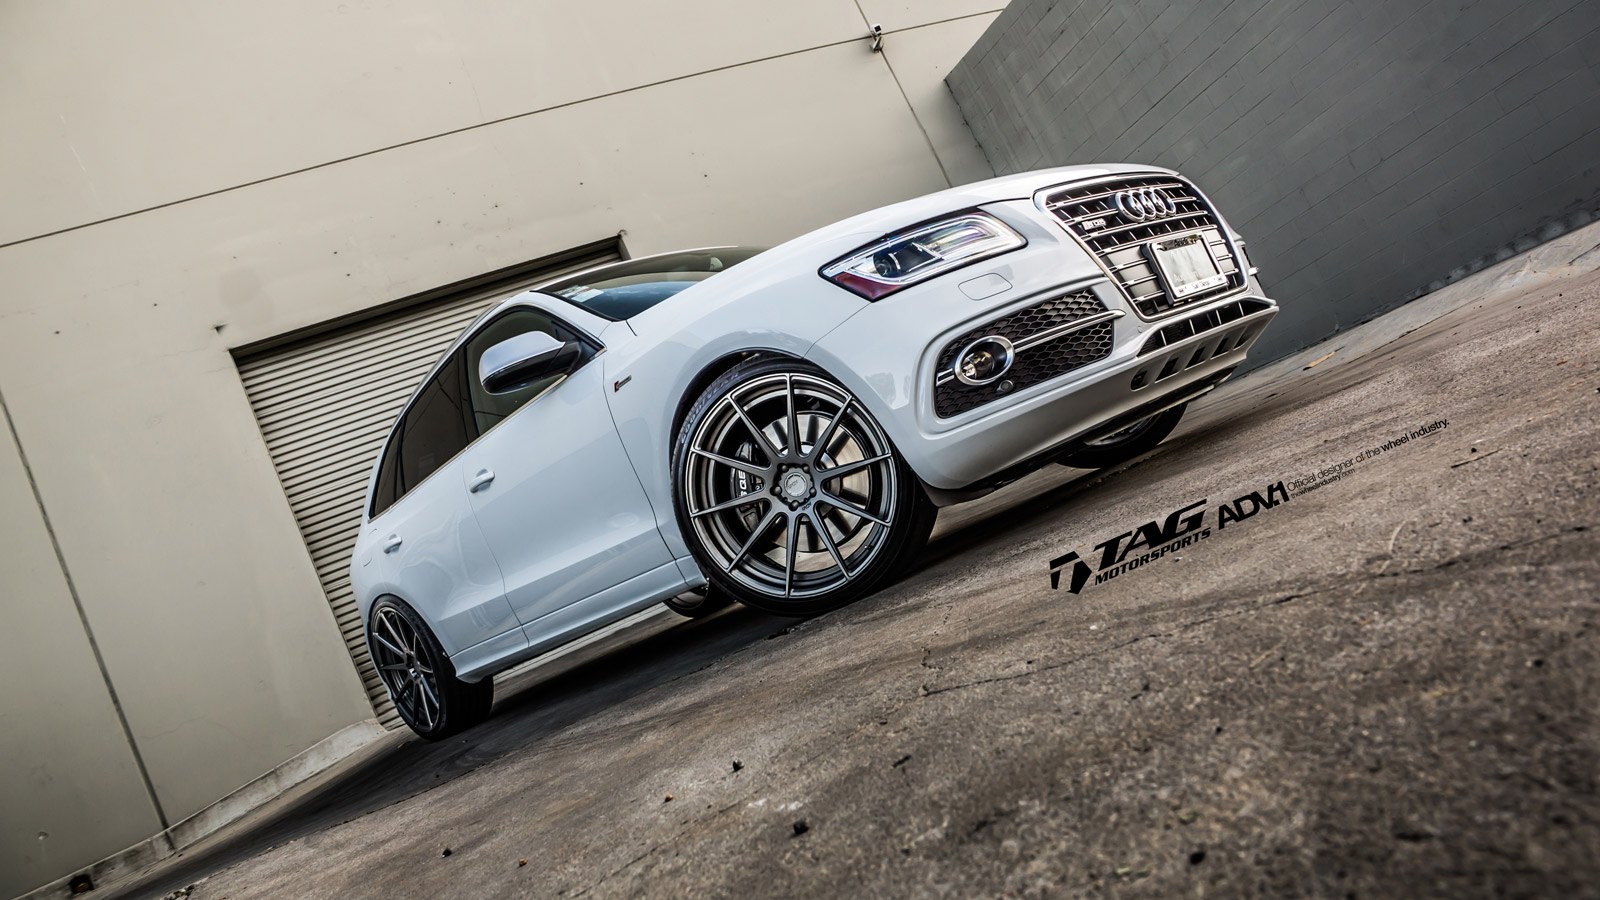 Aftermarket Headlights on White Audi SQ5 - Photo by ADV.1